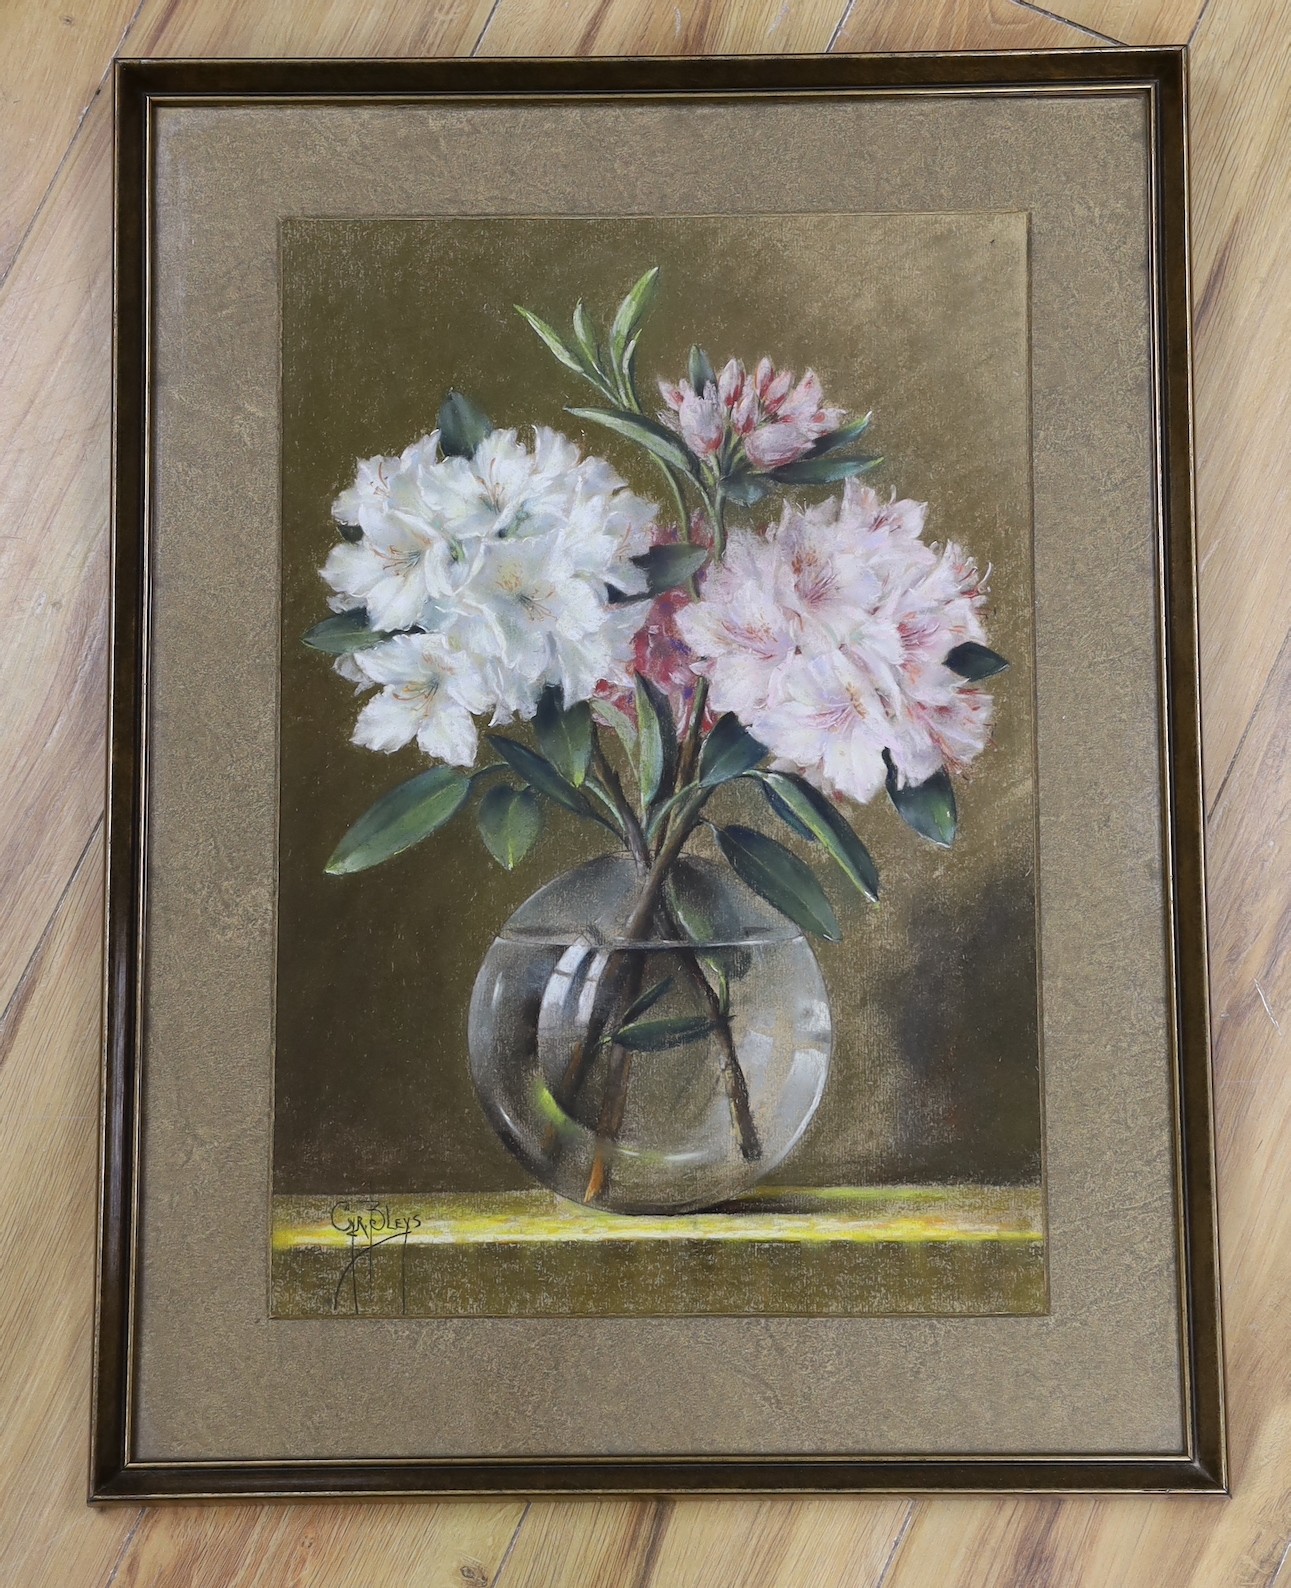 Adrianus Cyriacu Bleys (Dutch, 1842-1912), pastel, Still life of Rhododendron blooms in a glass vase, signed, 52 x 35cm